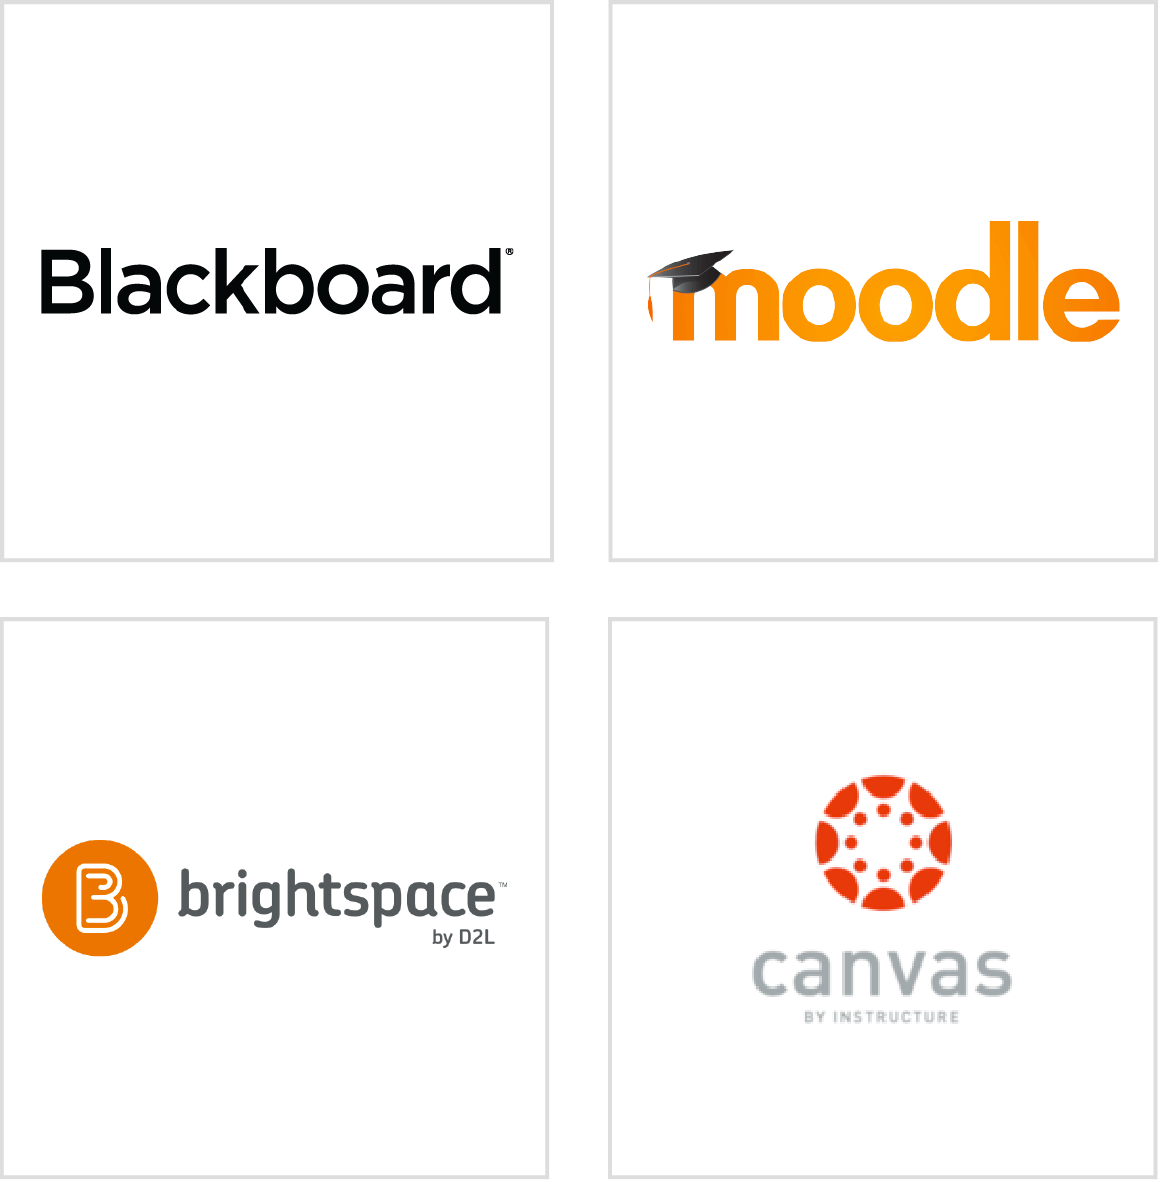 Blackboard, Moodle, Brightspace, and Canvas logos